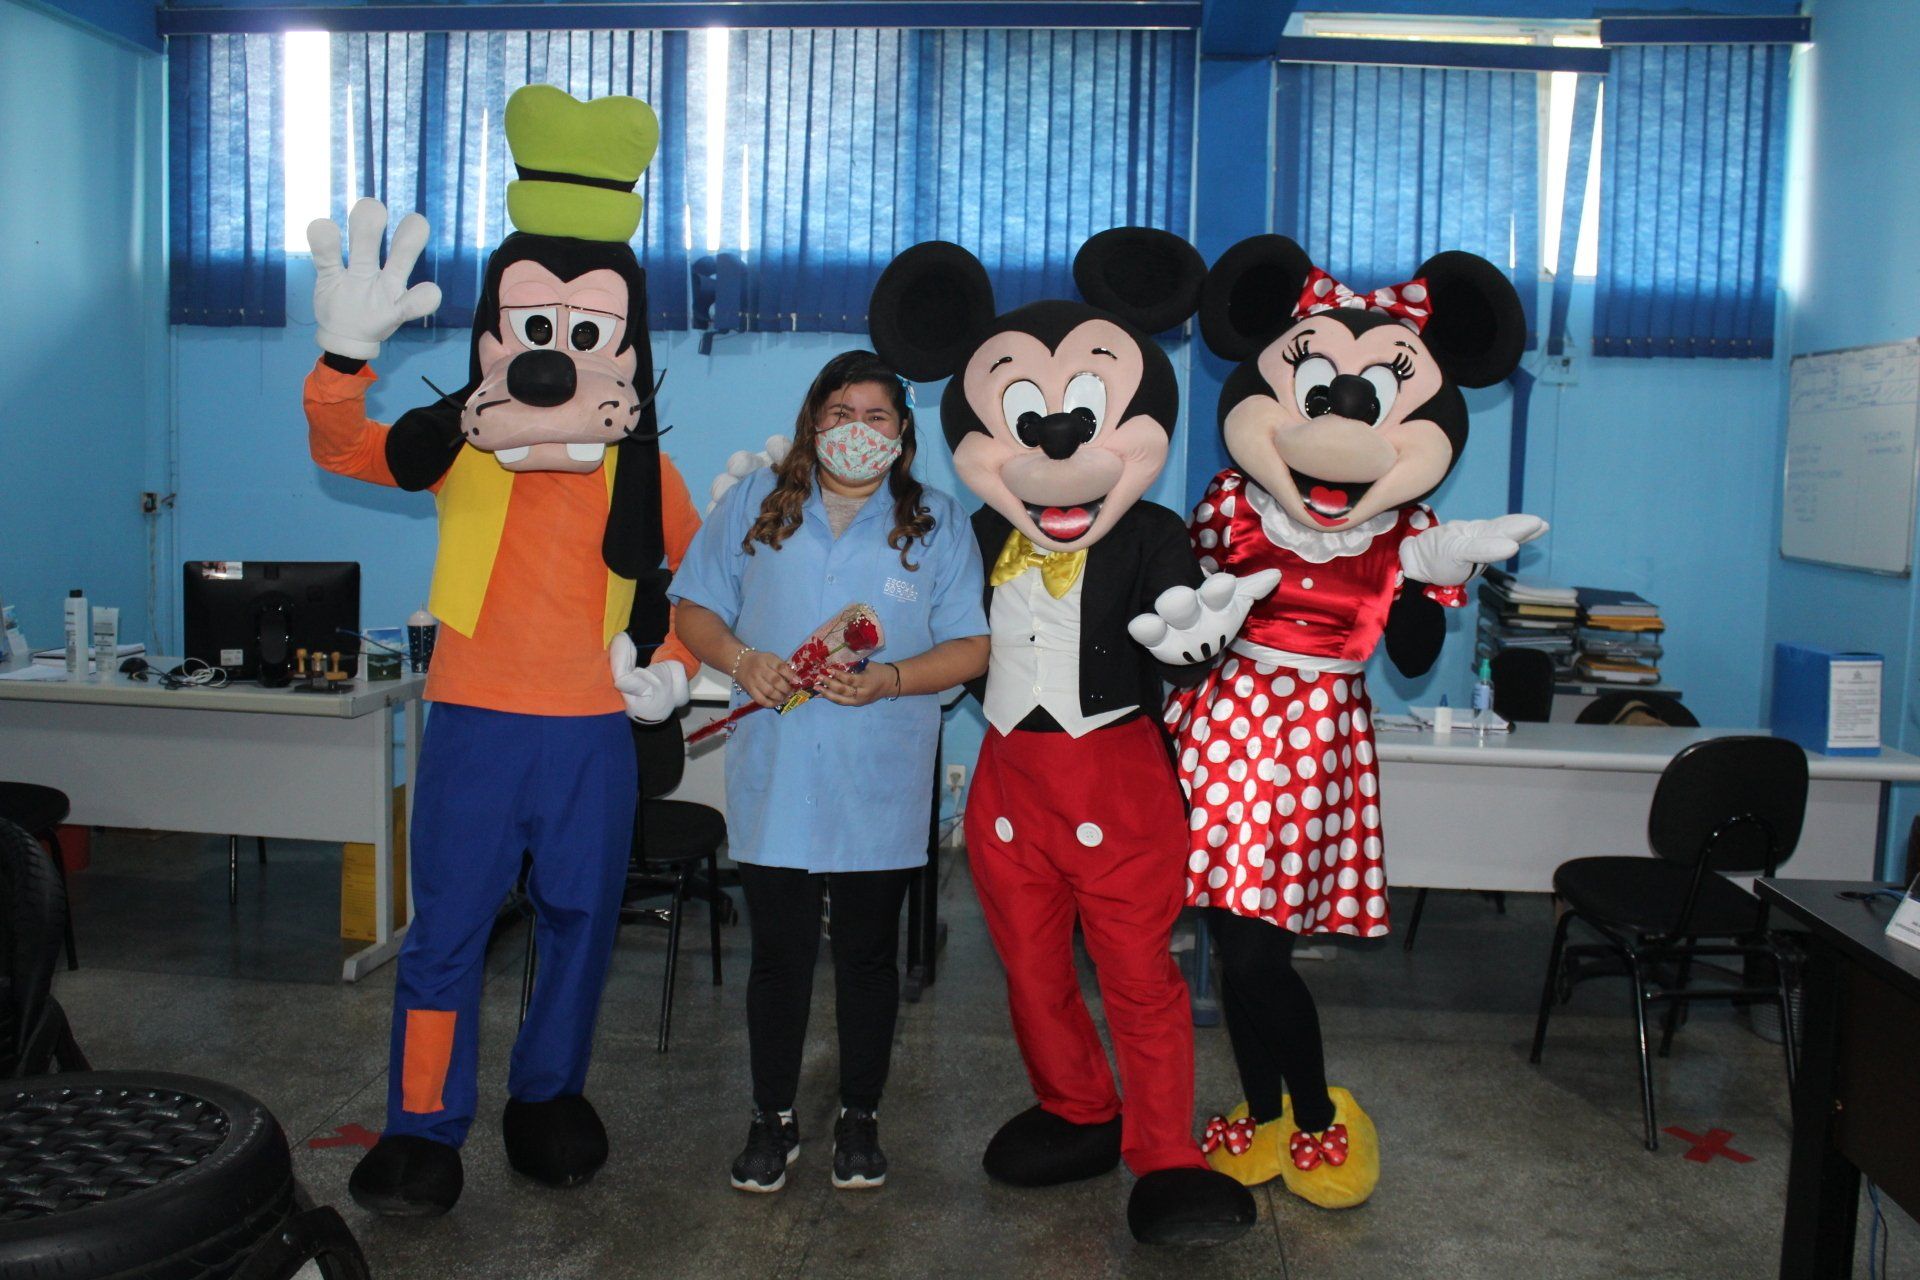 Teacher at ADCAM standing with Minnie Mouse, Mickey Mouse and Goofy (in costume). 